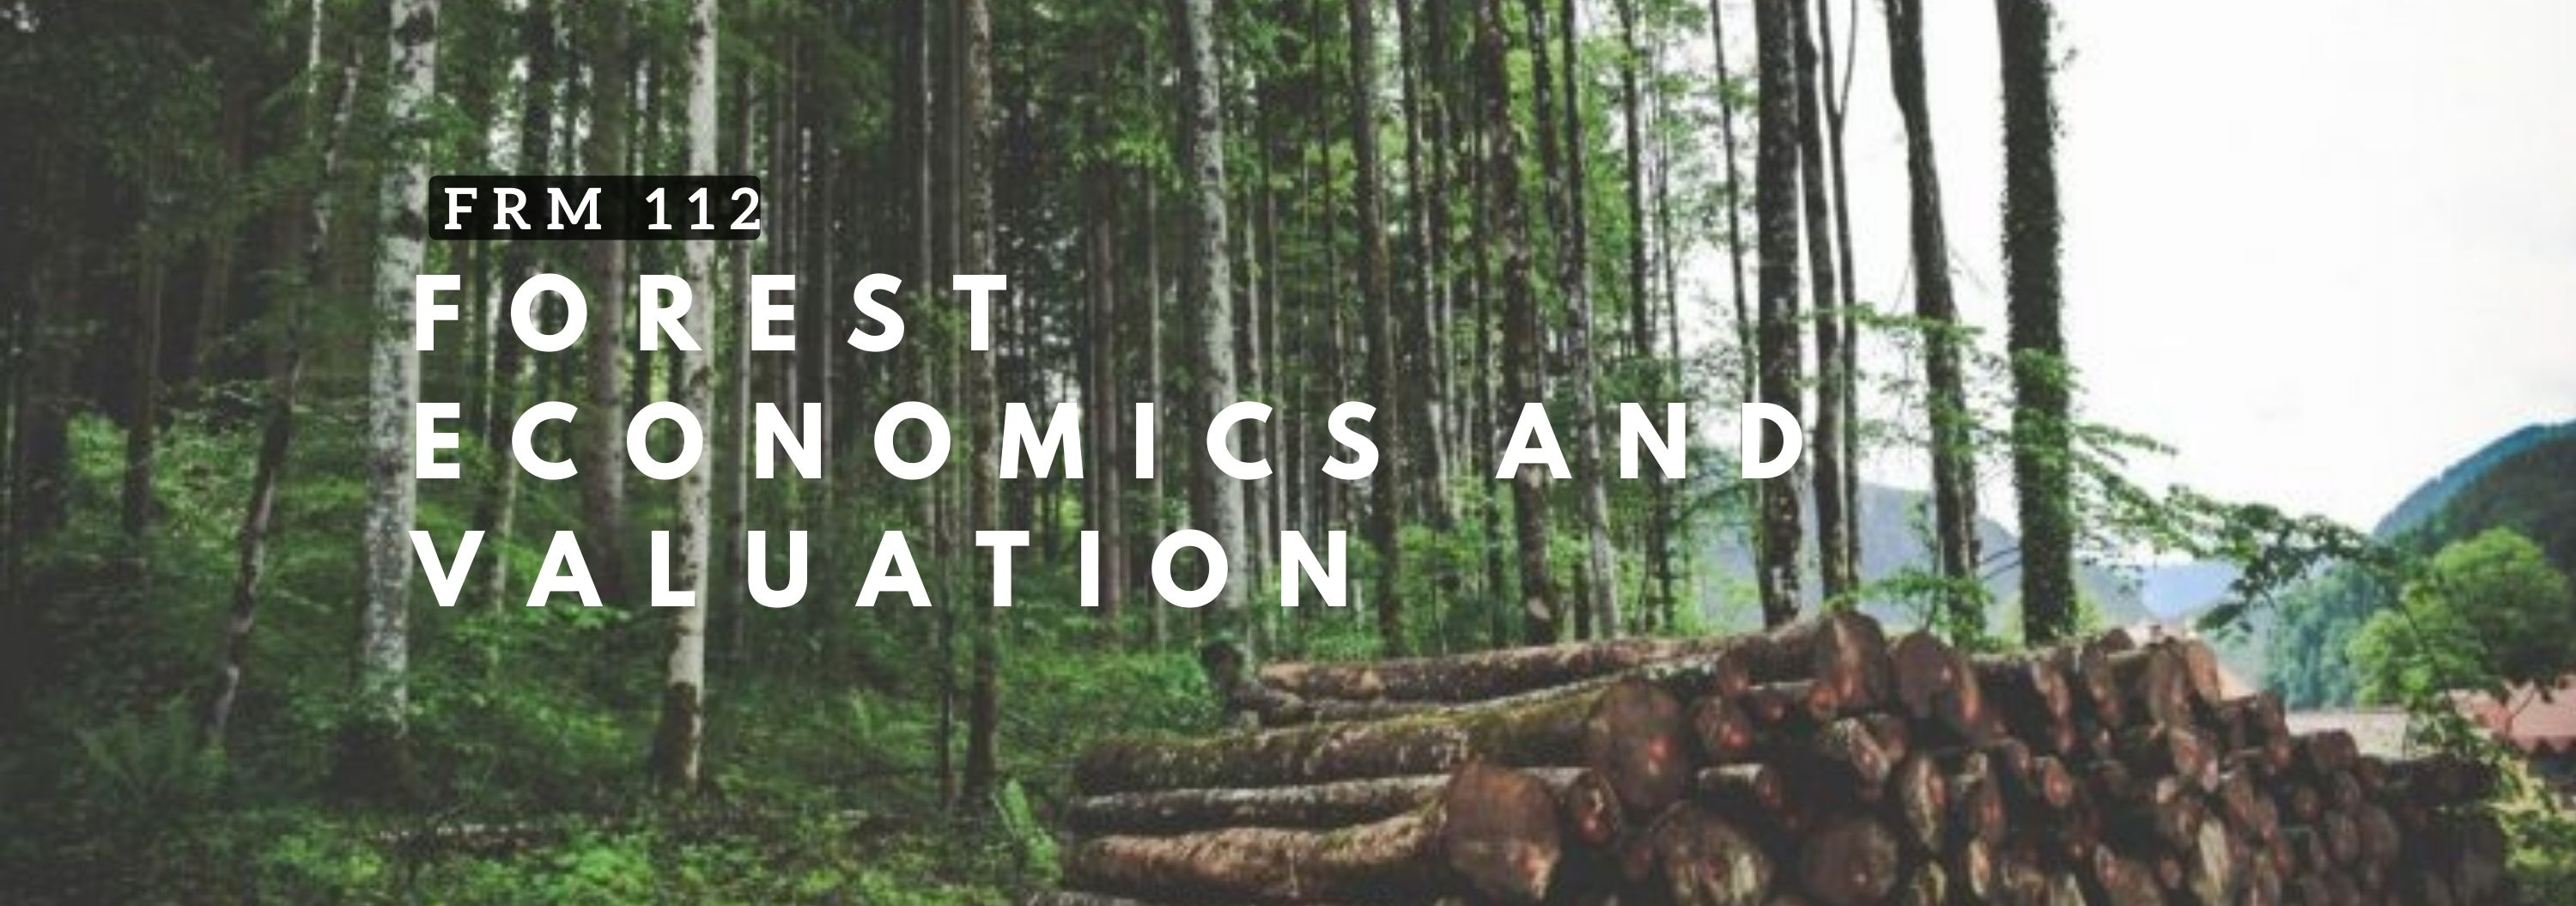 Summary of Forest Resource Economics and Valuation